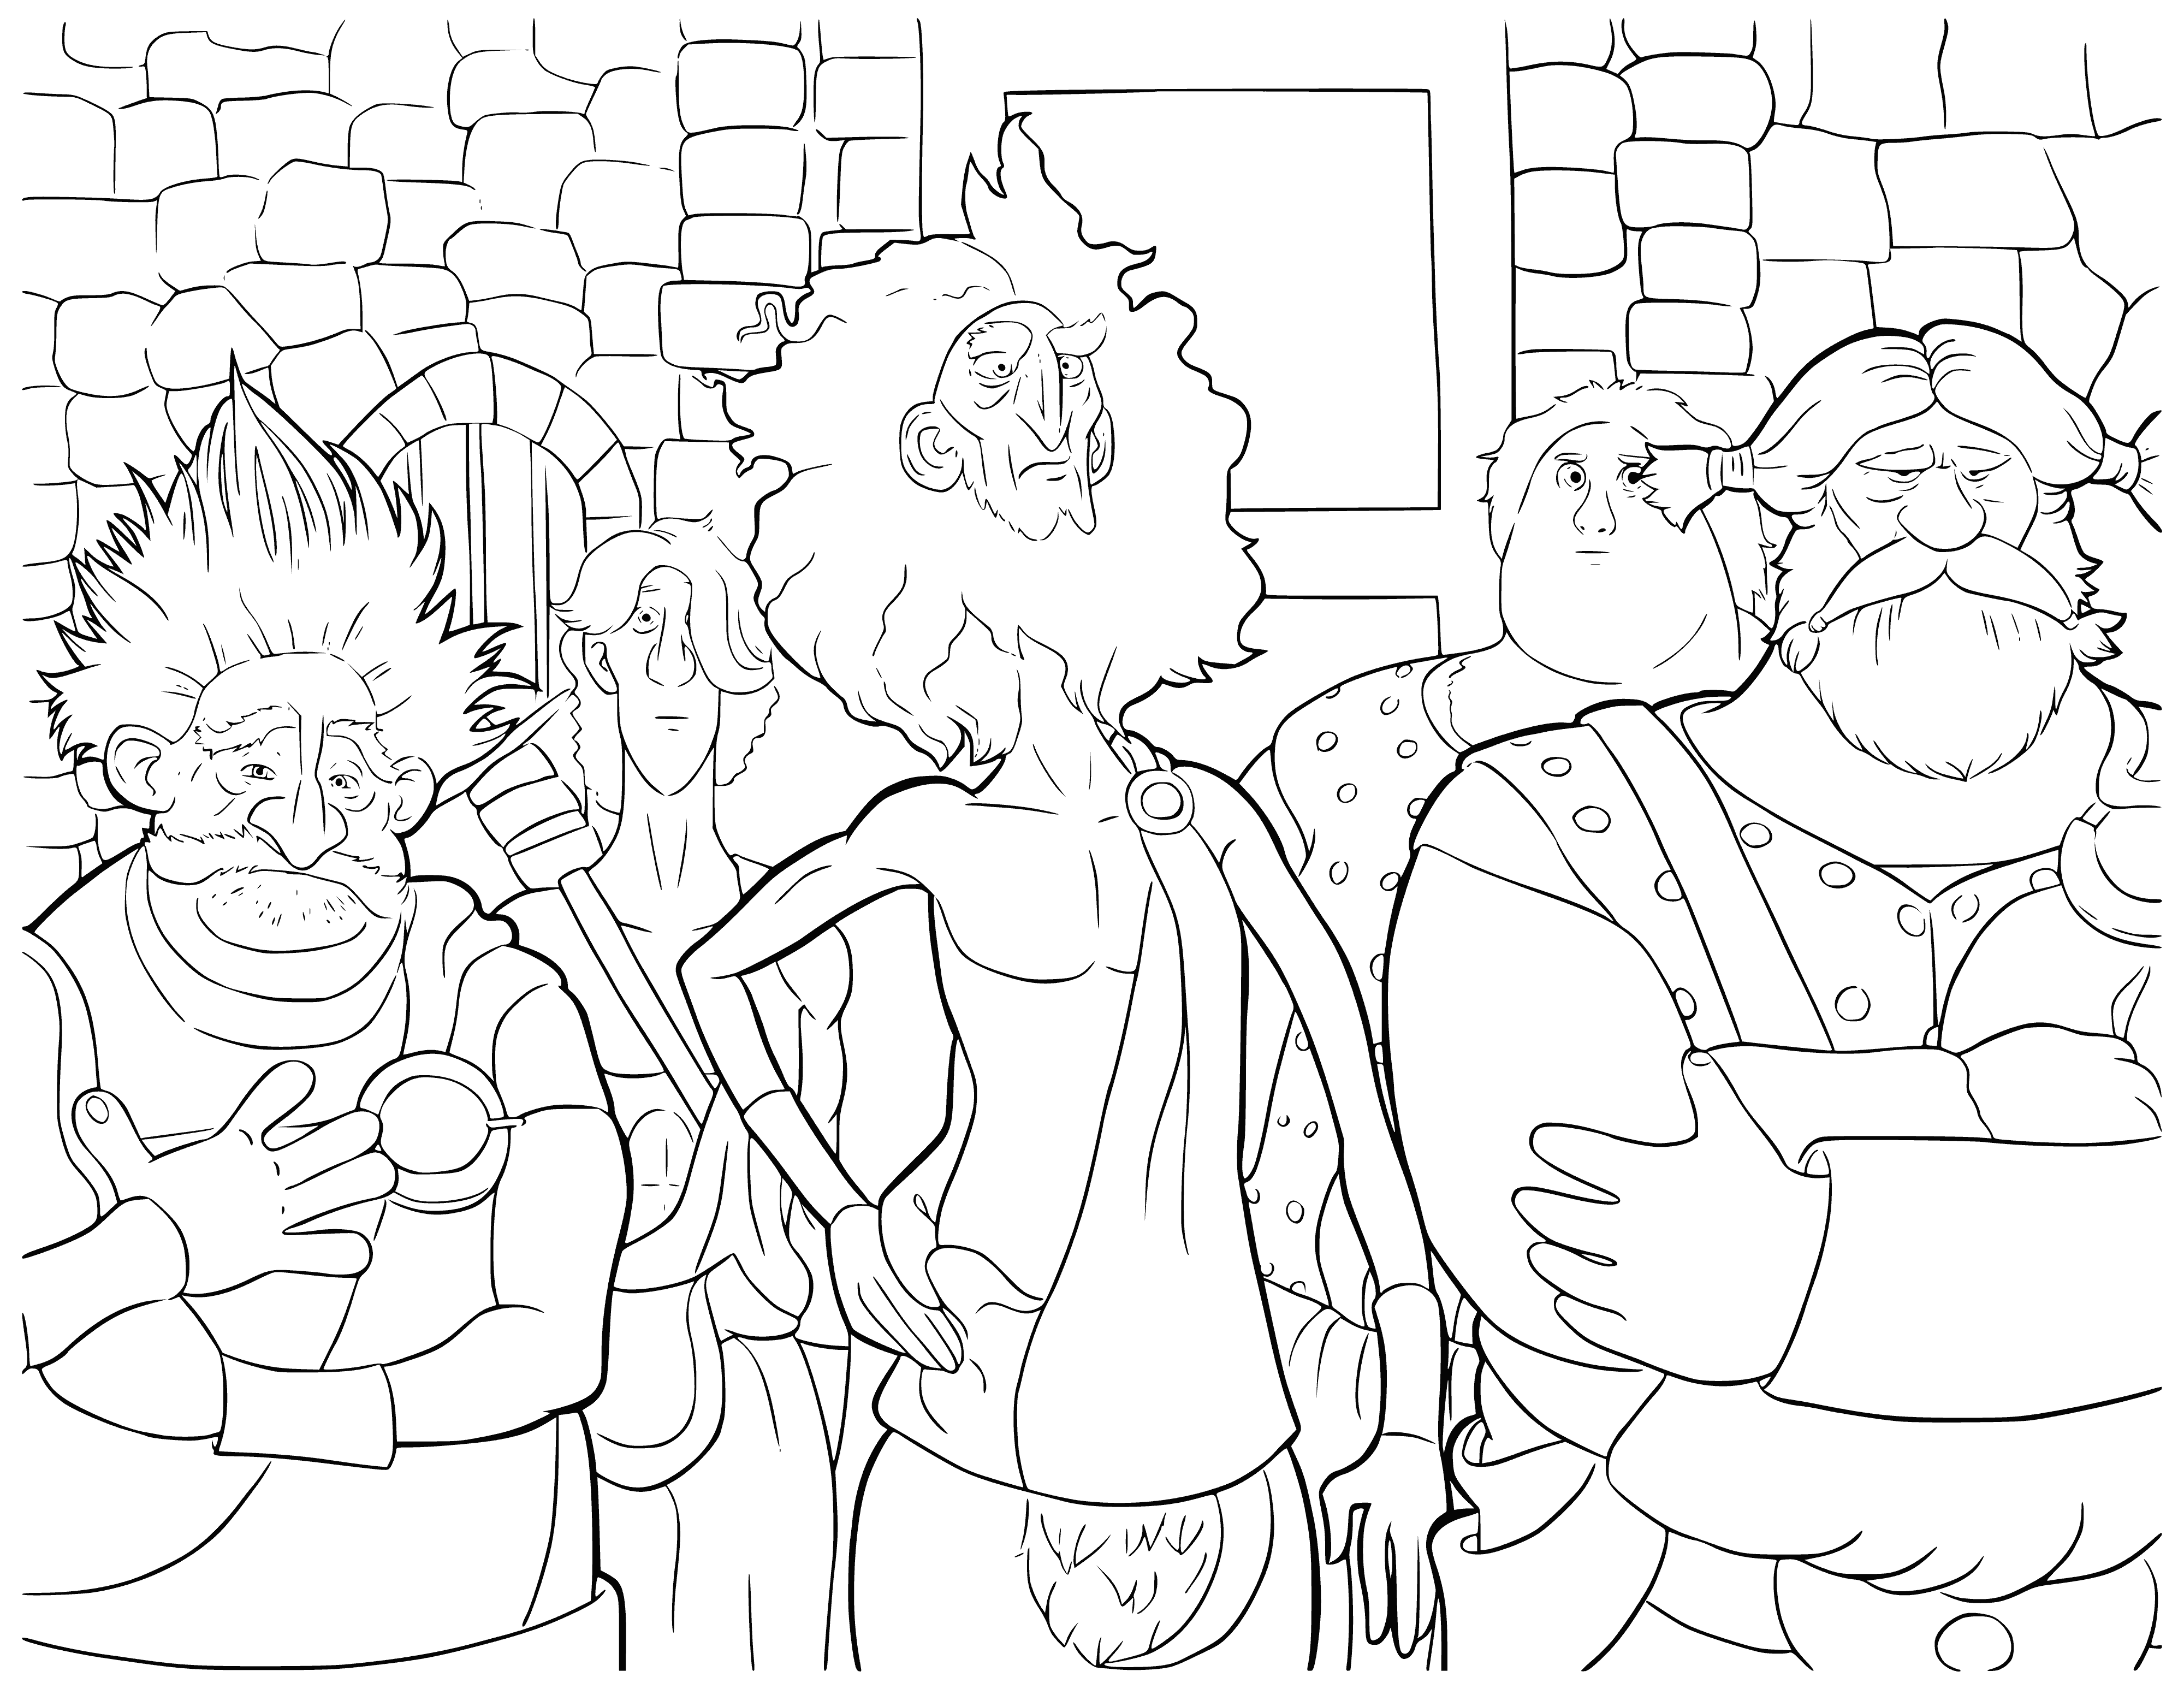 Scottish clan leaders coloring page